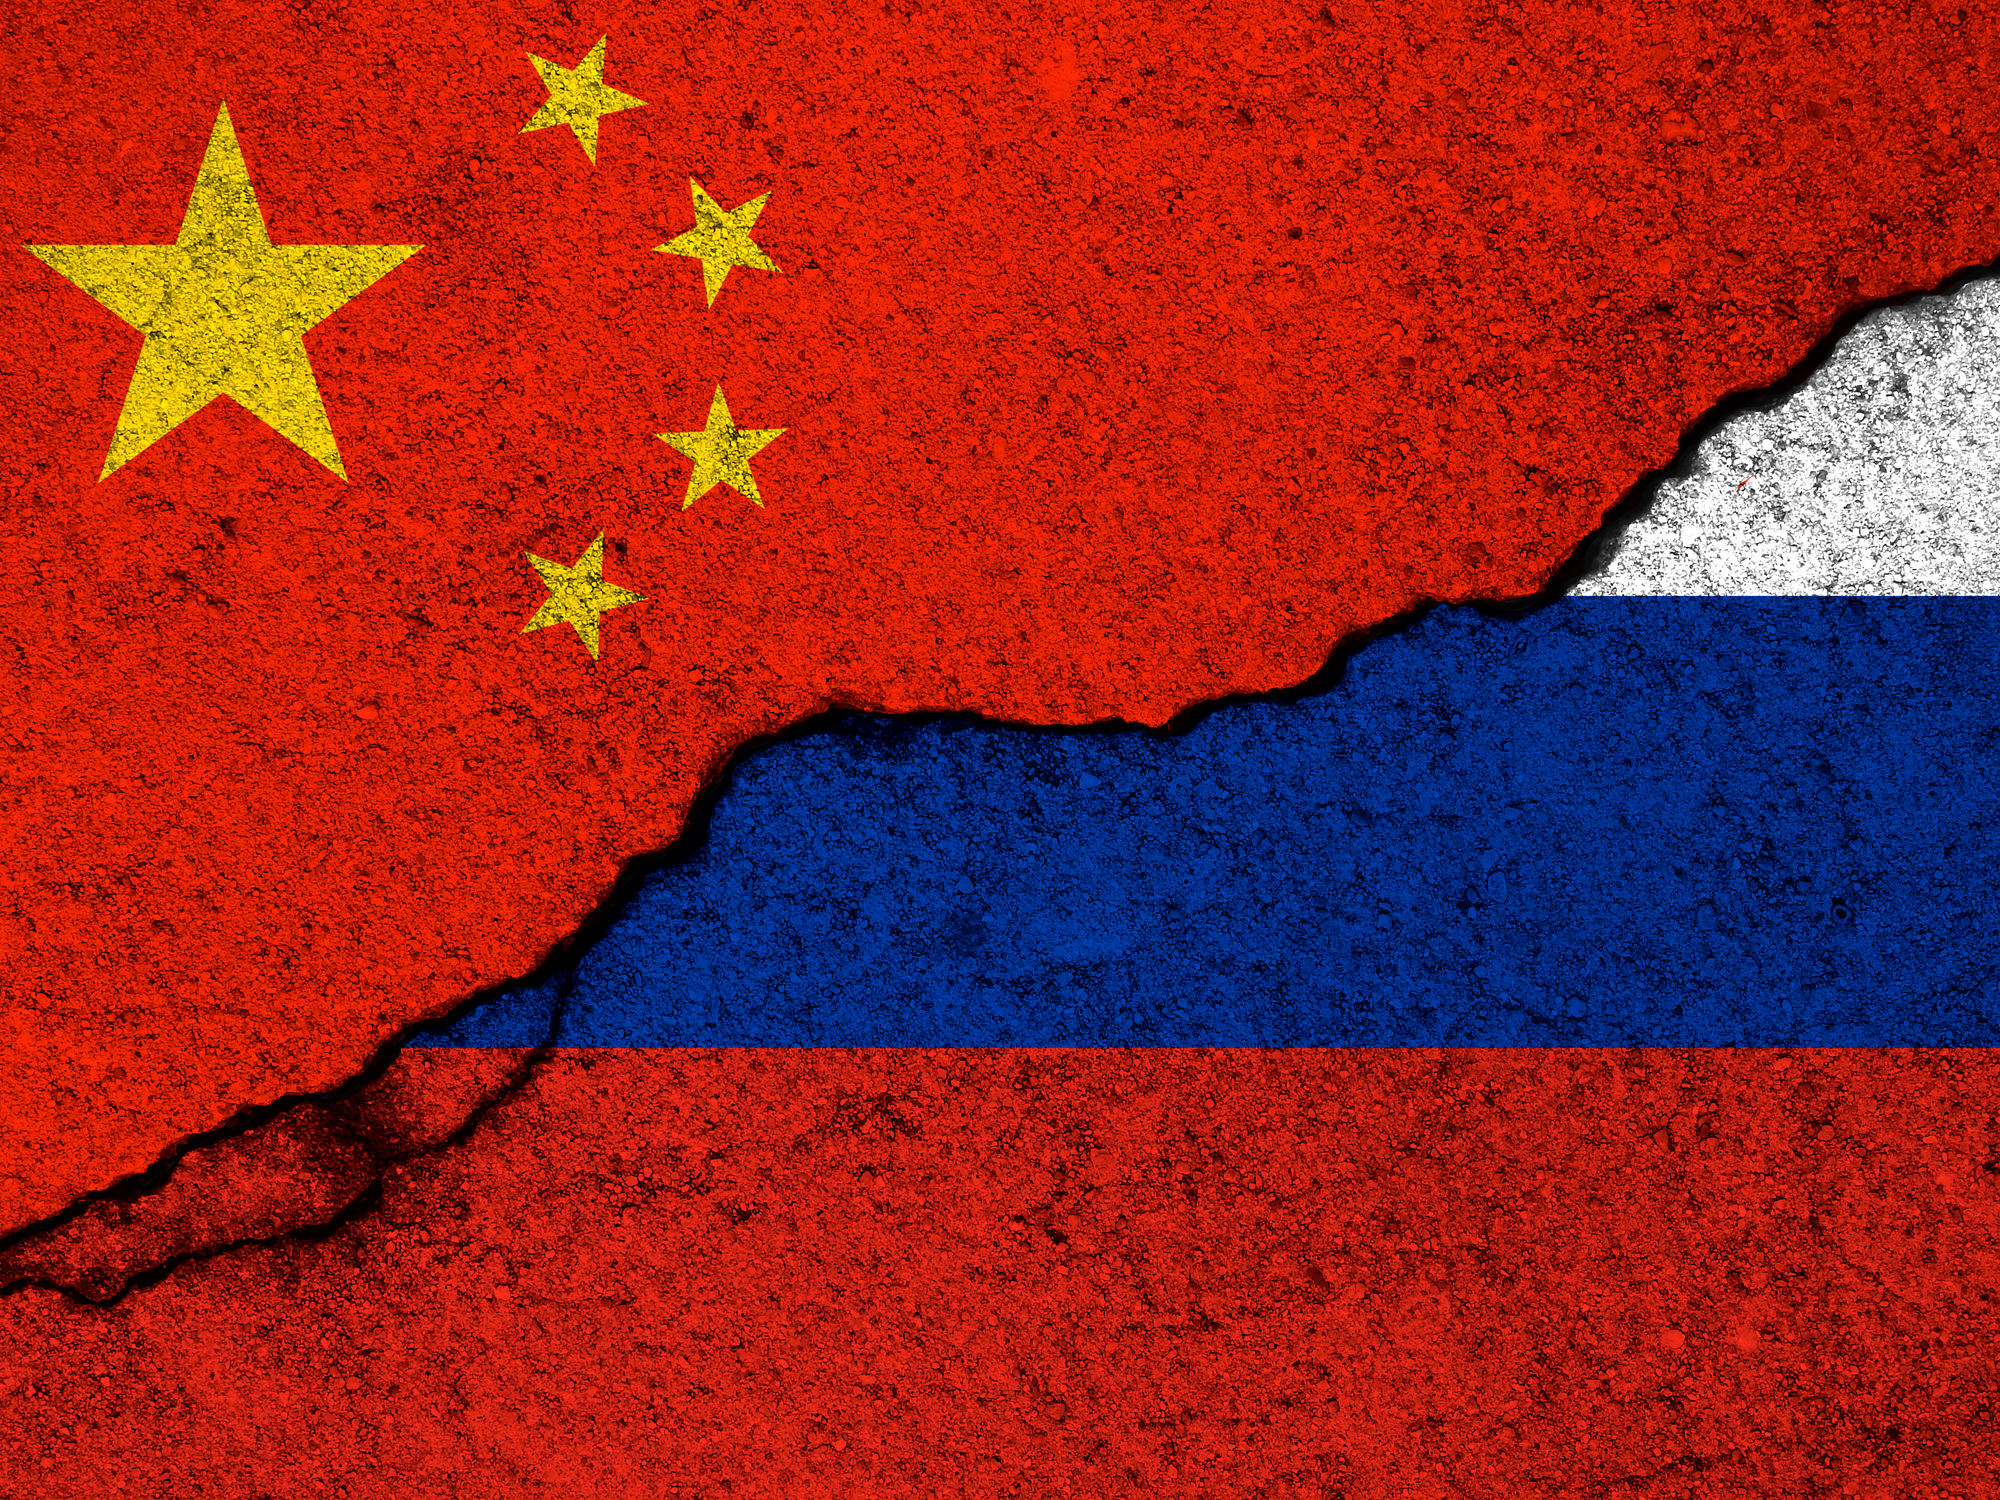 China and Russia relationships background. Country flags painted on cracked concrete walls